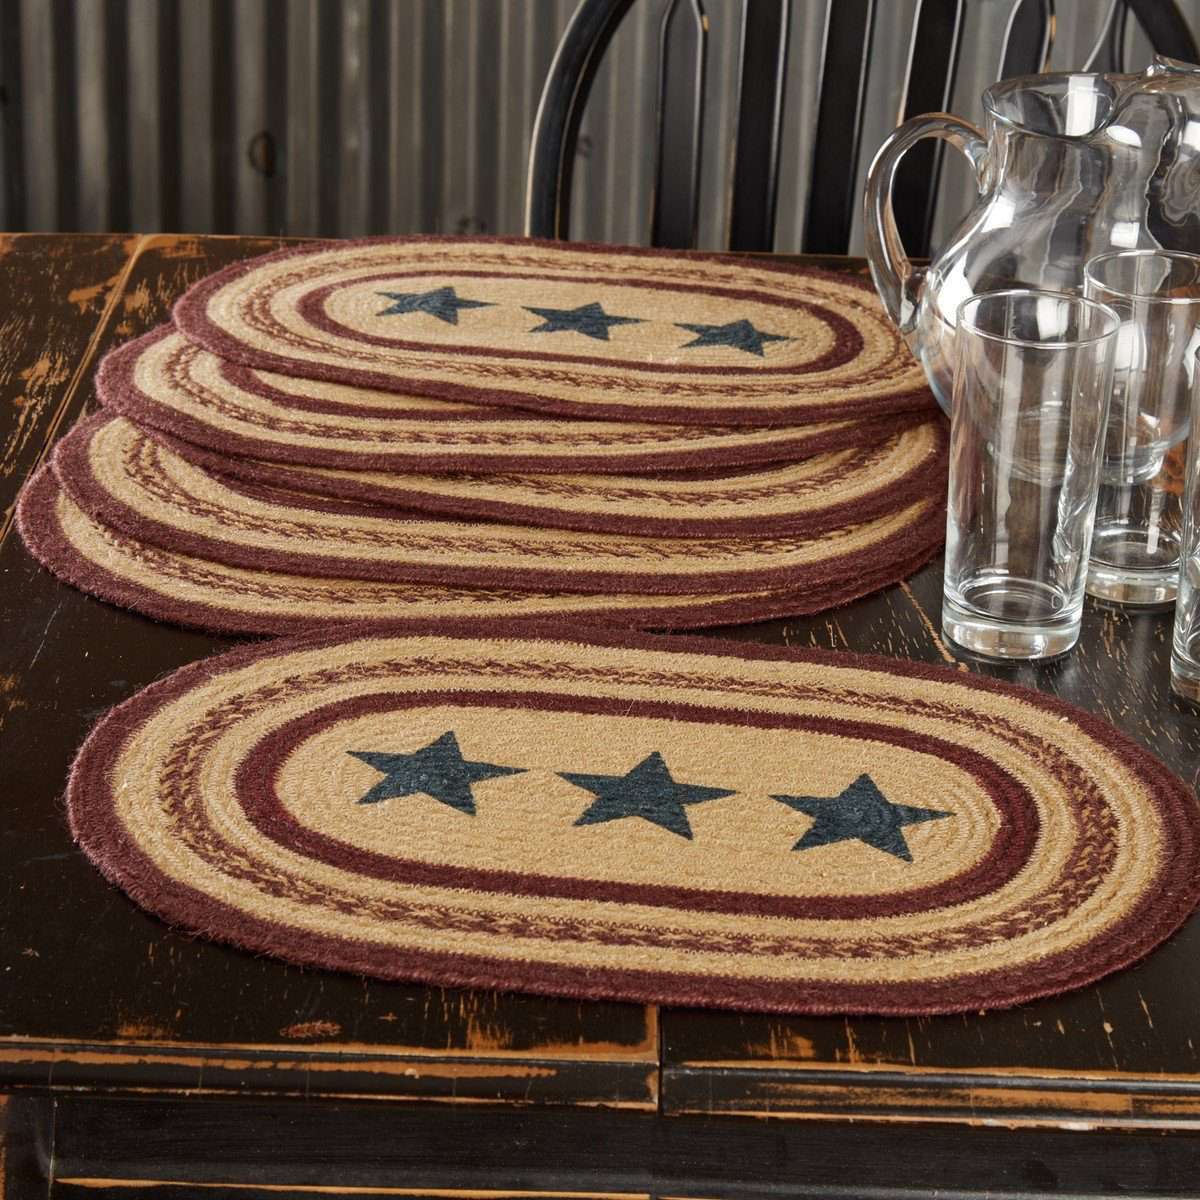 Potomac Stencil Stars Jute Braided Placemat Set of 6 VHC Brands - The Fox Decor